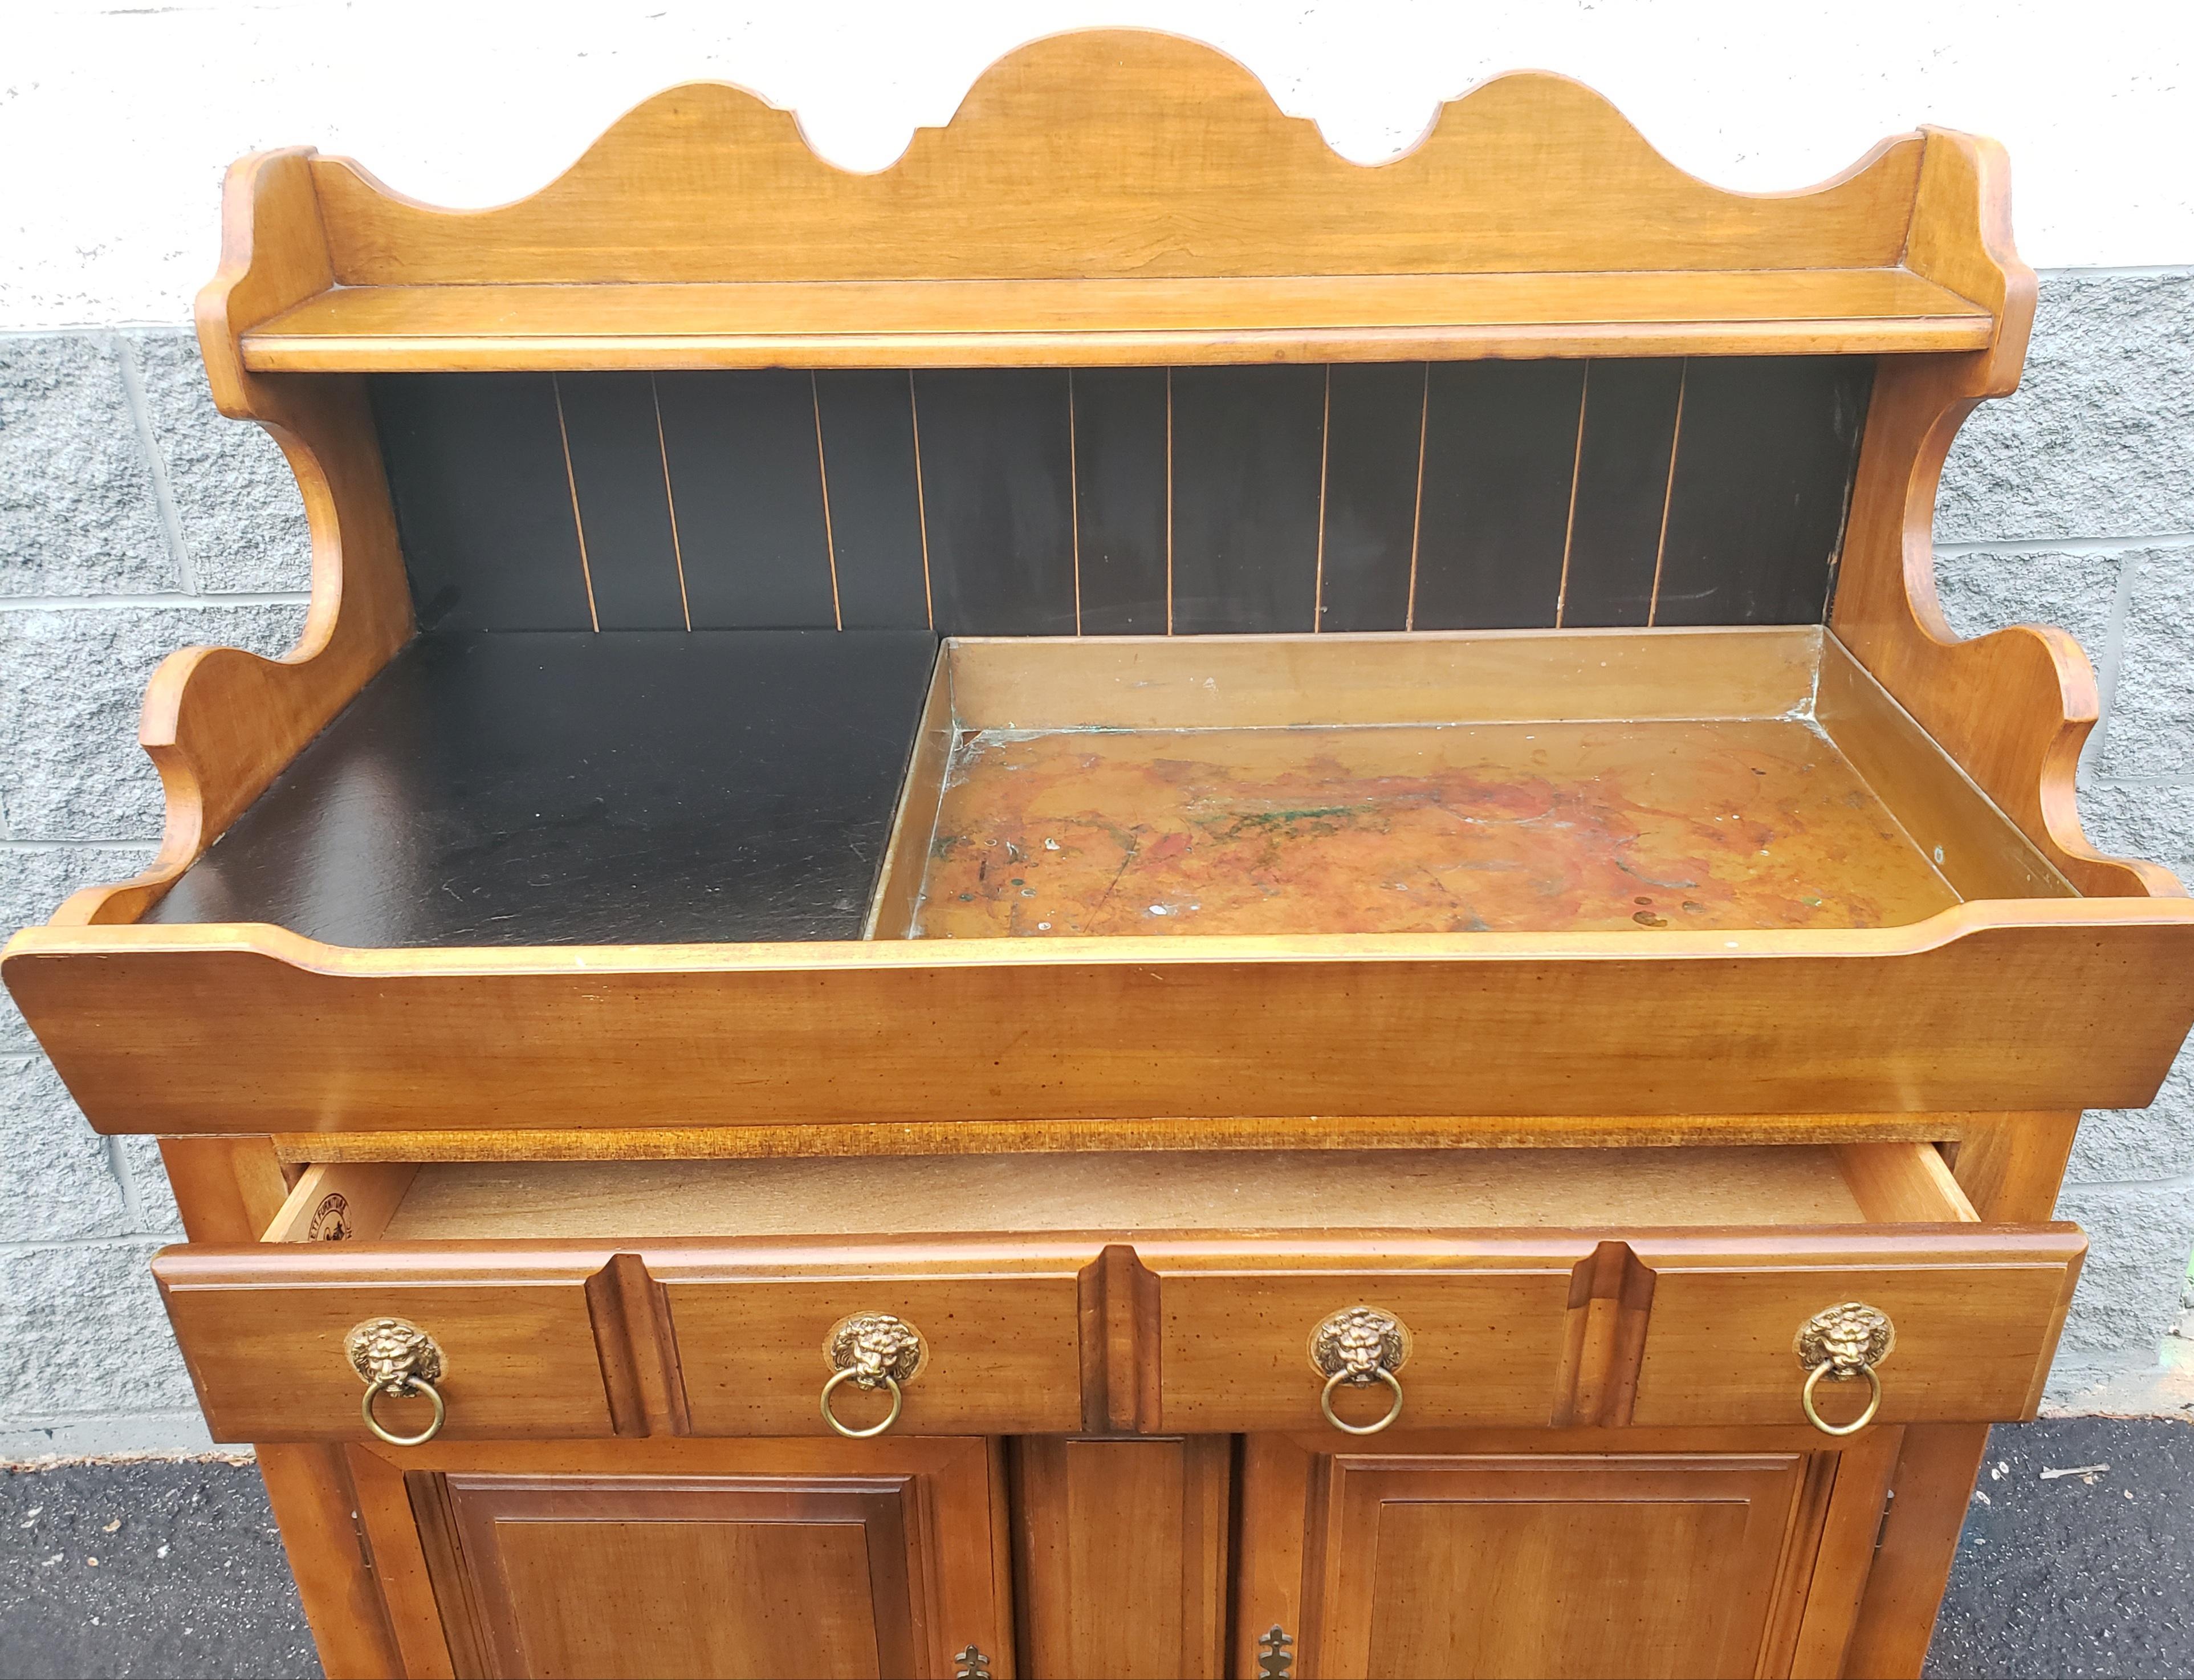 Laiton Vintage Bassett Maple Dry Sink Cabinet with Copper Lined Basin en vente